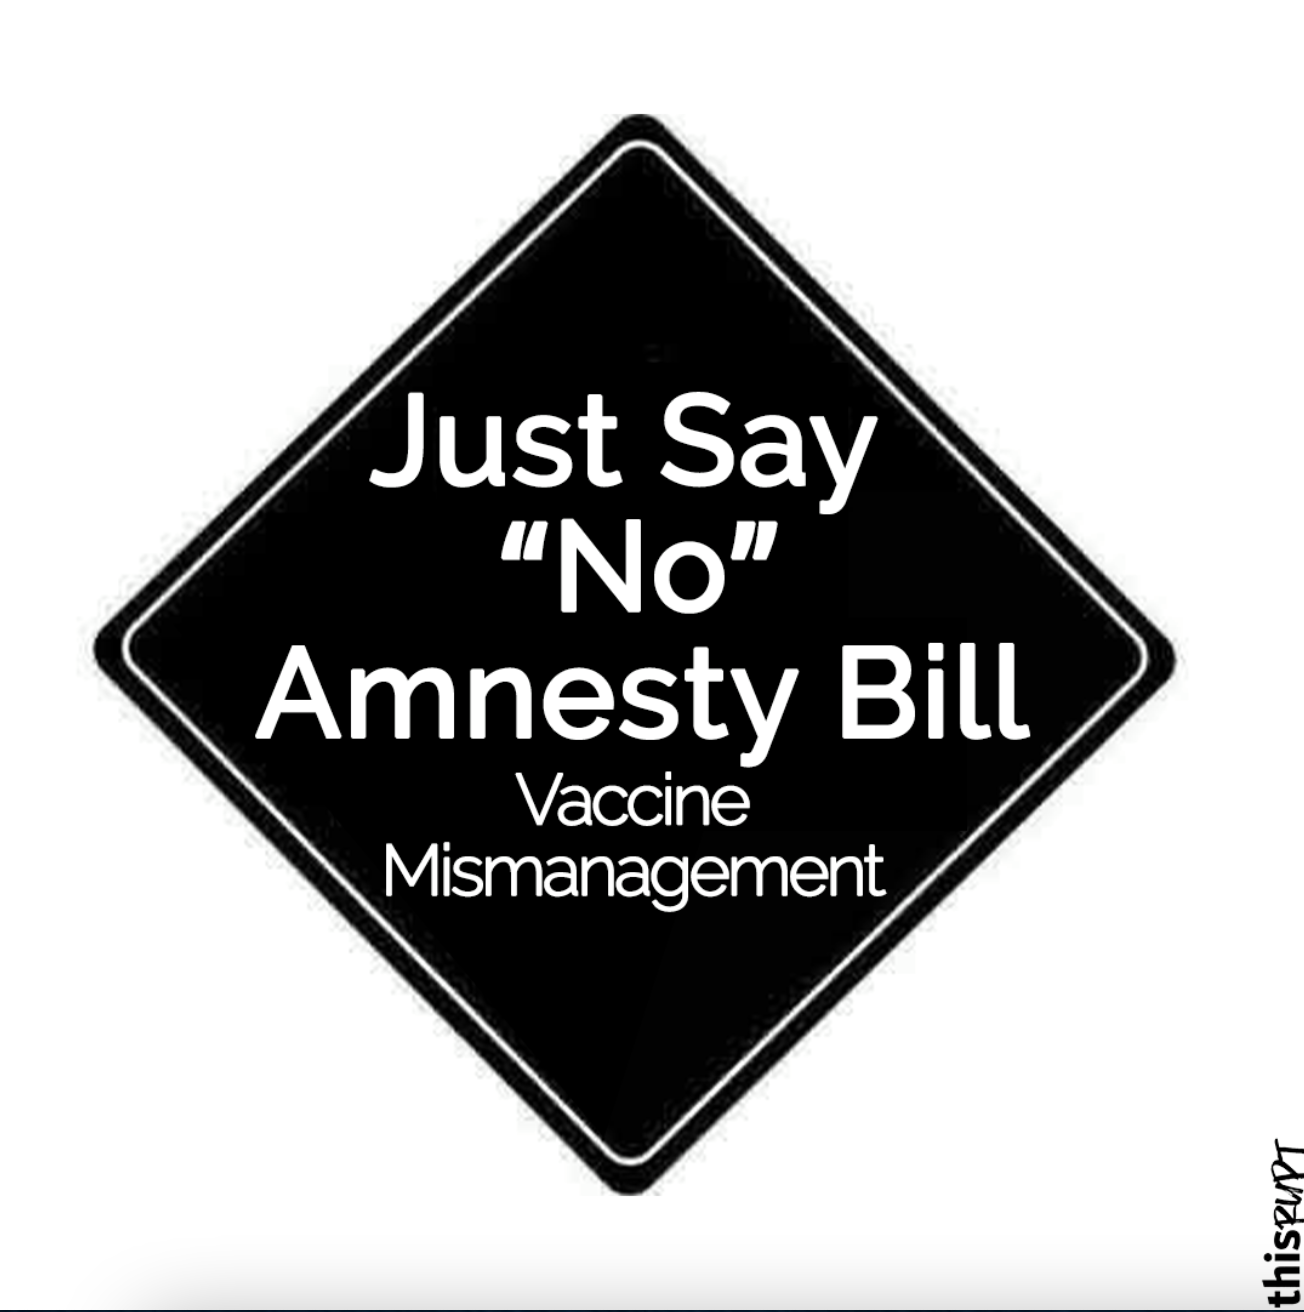 Amnesty Bill: the art of covering your ass